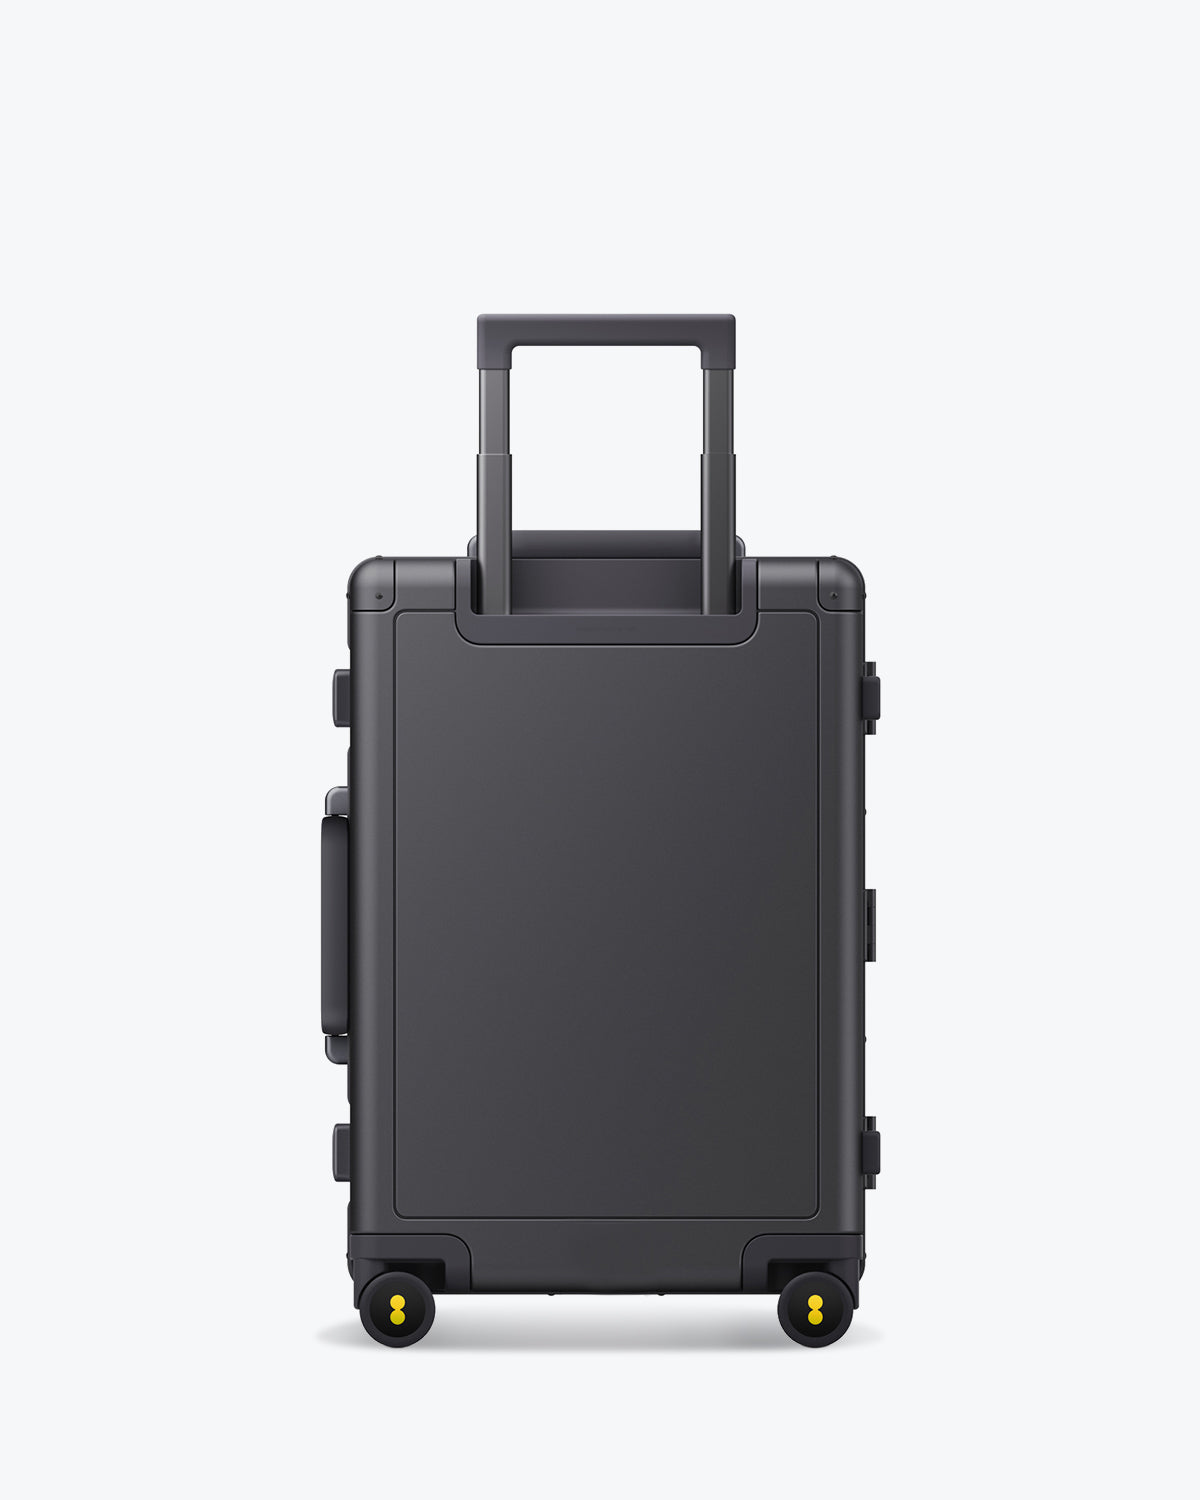 Pelica Air Travel Cases (Carry-on & Large Hard Case Luggage)